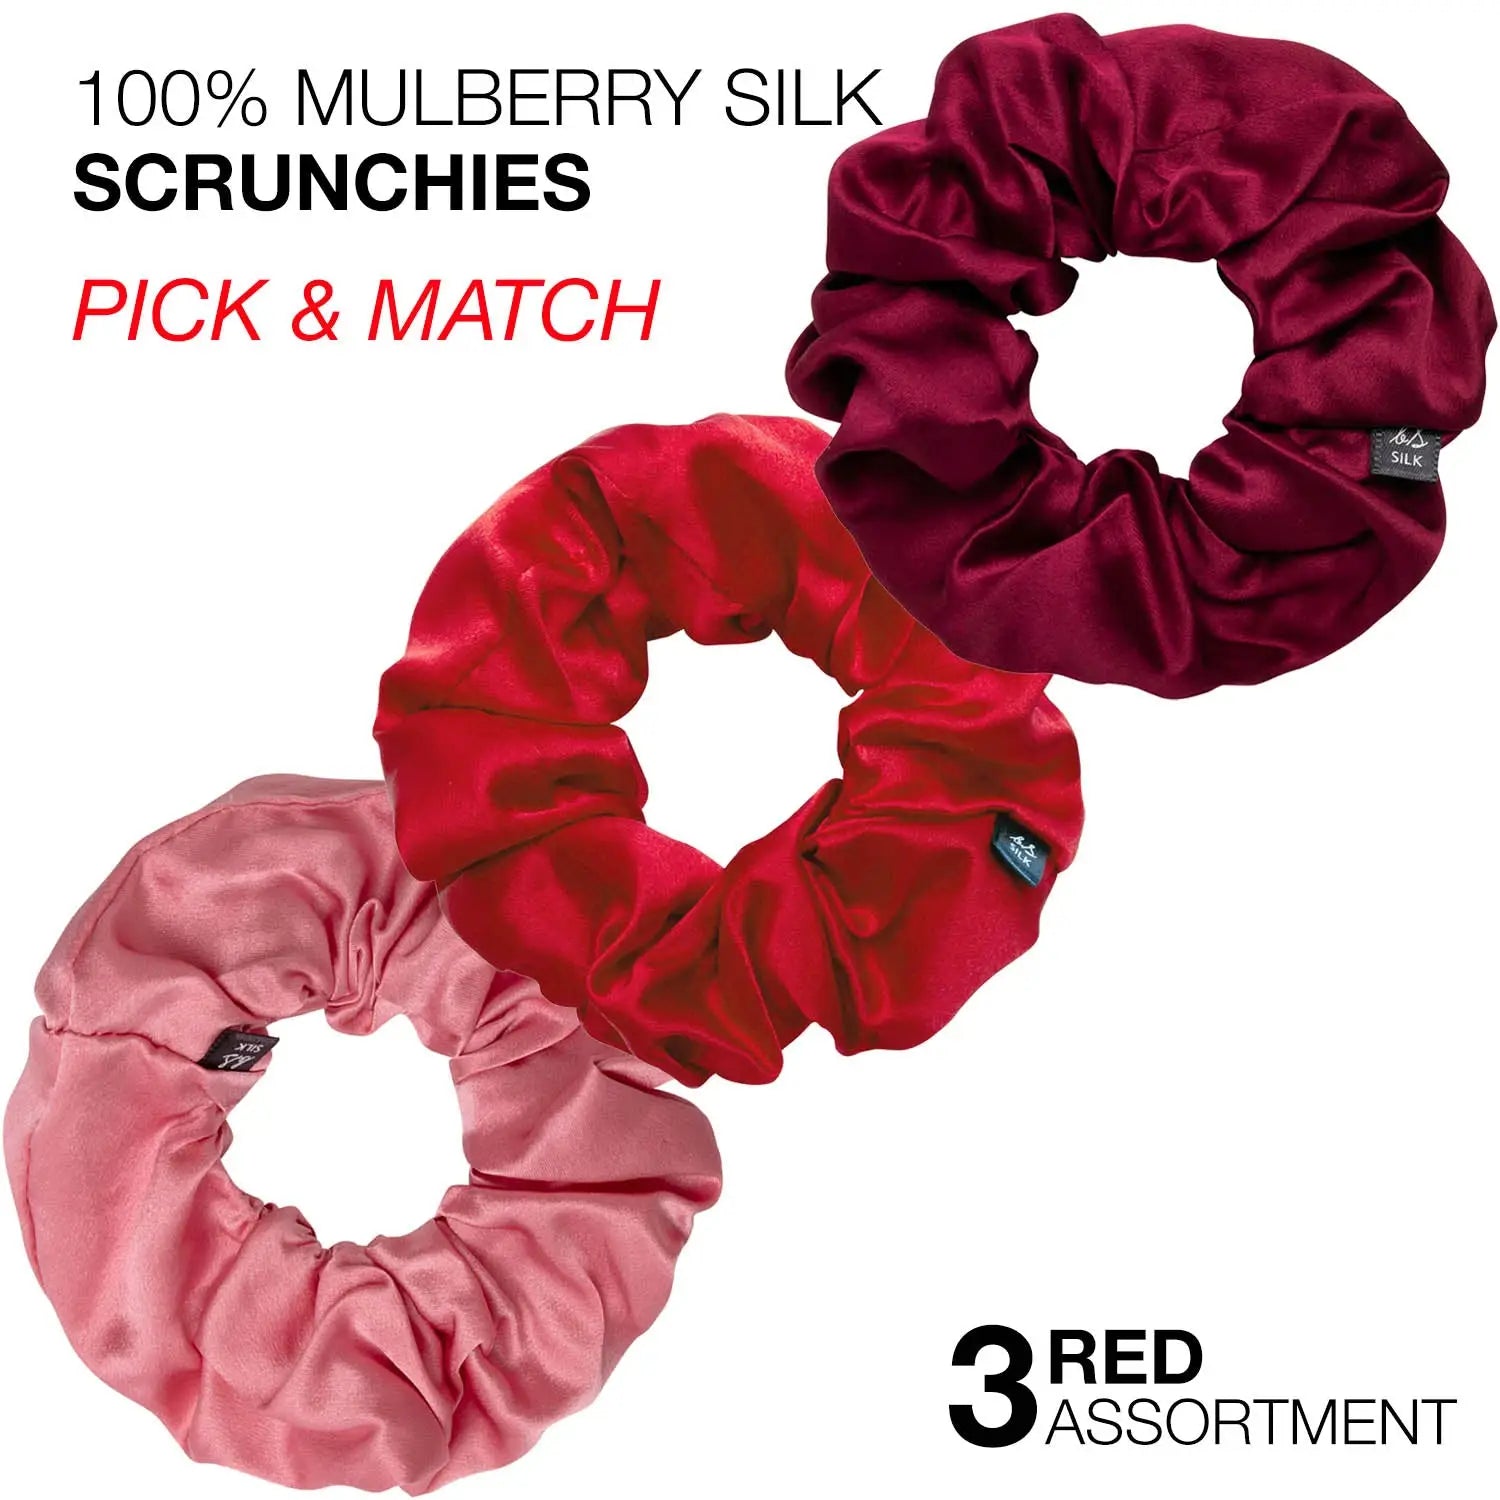 Mulberry Silk Hair Scrunchies in Pink and Red